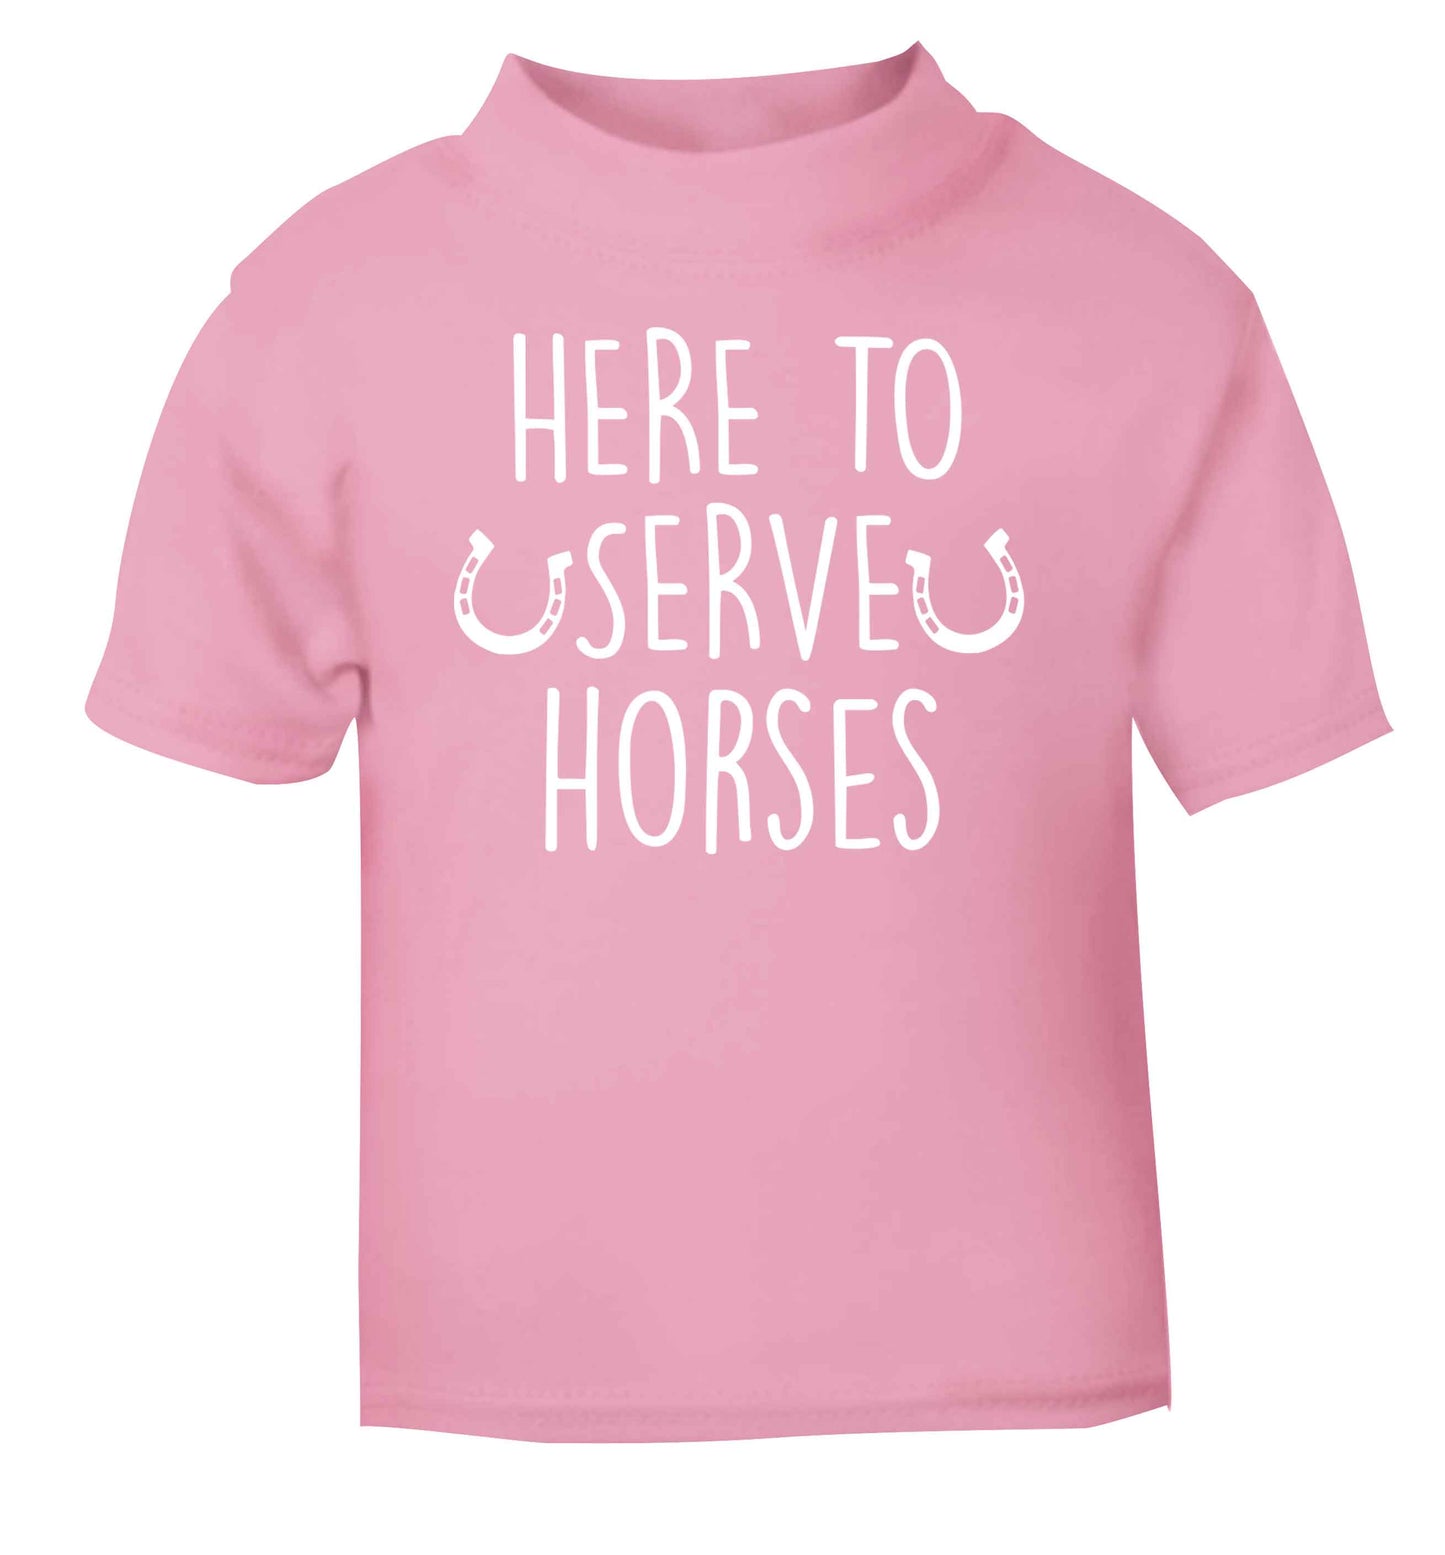 Here to serve horses light pink baby toddler Tshirt 2 Years